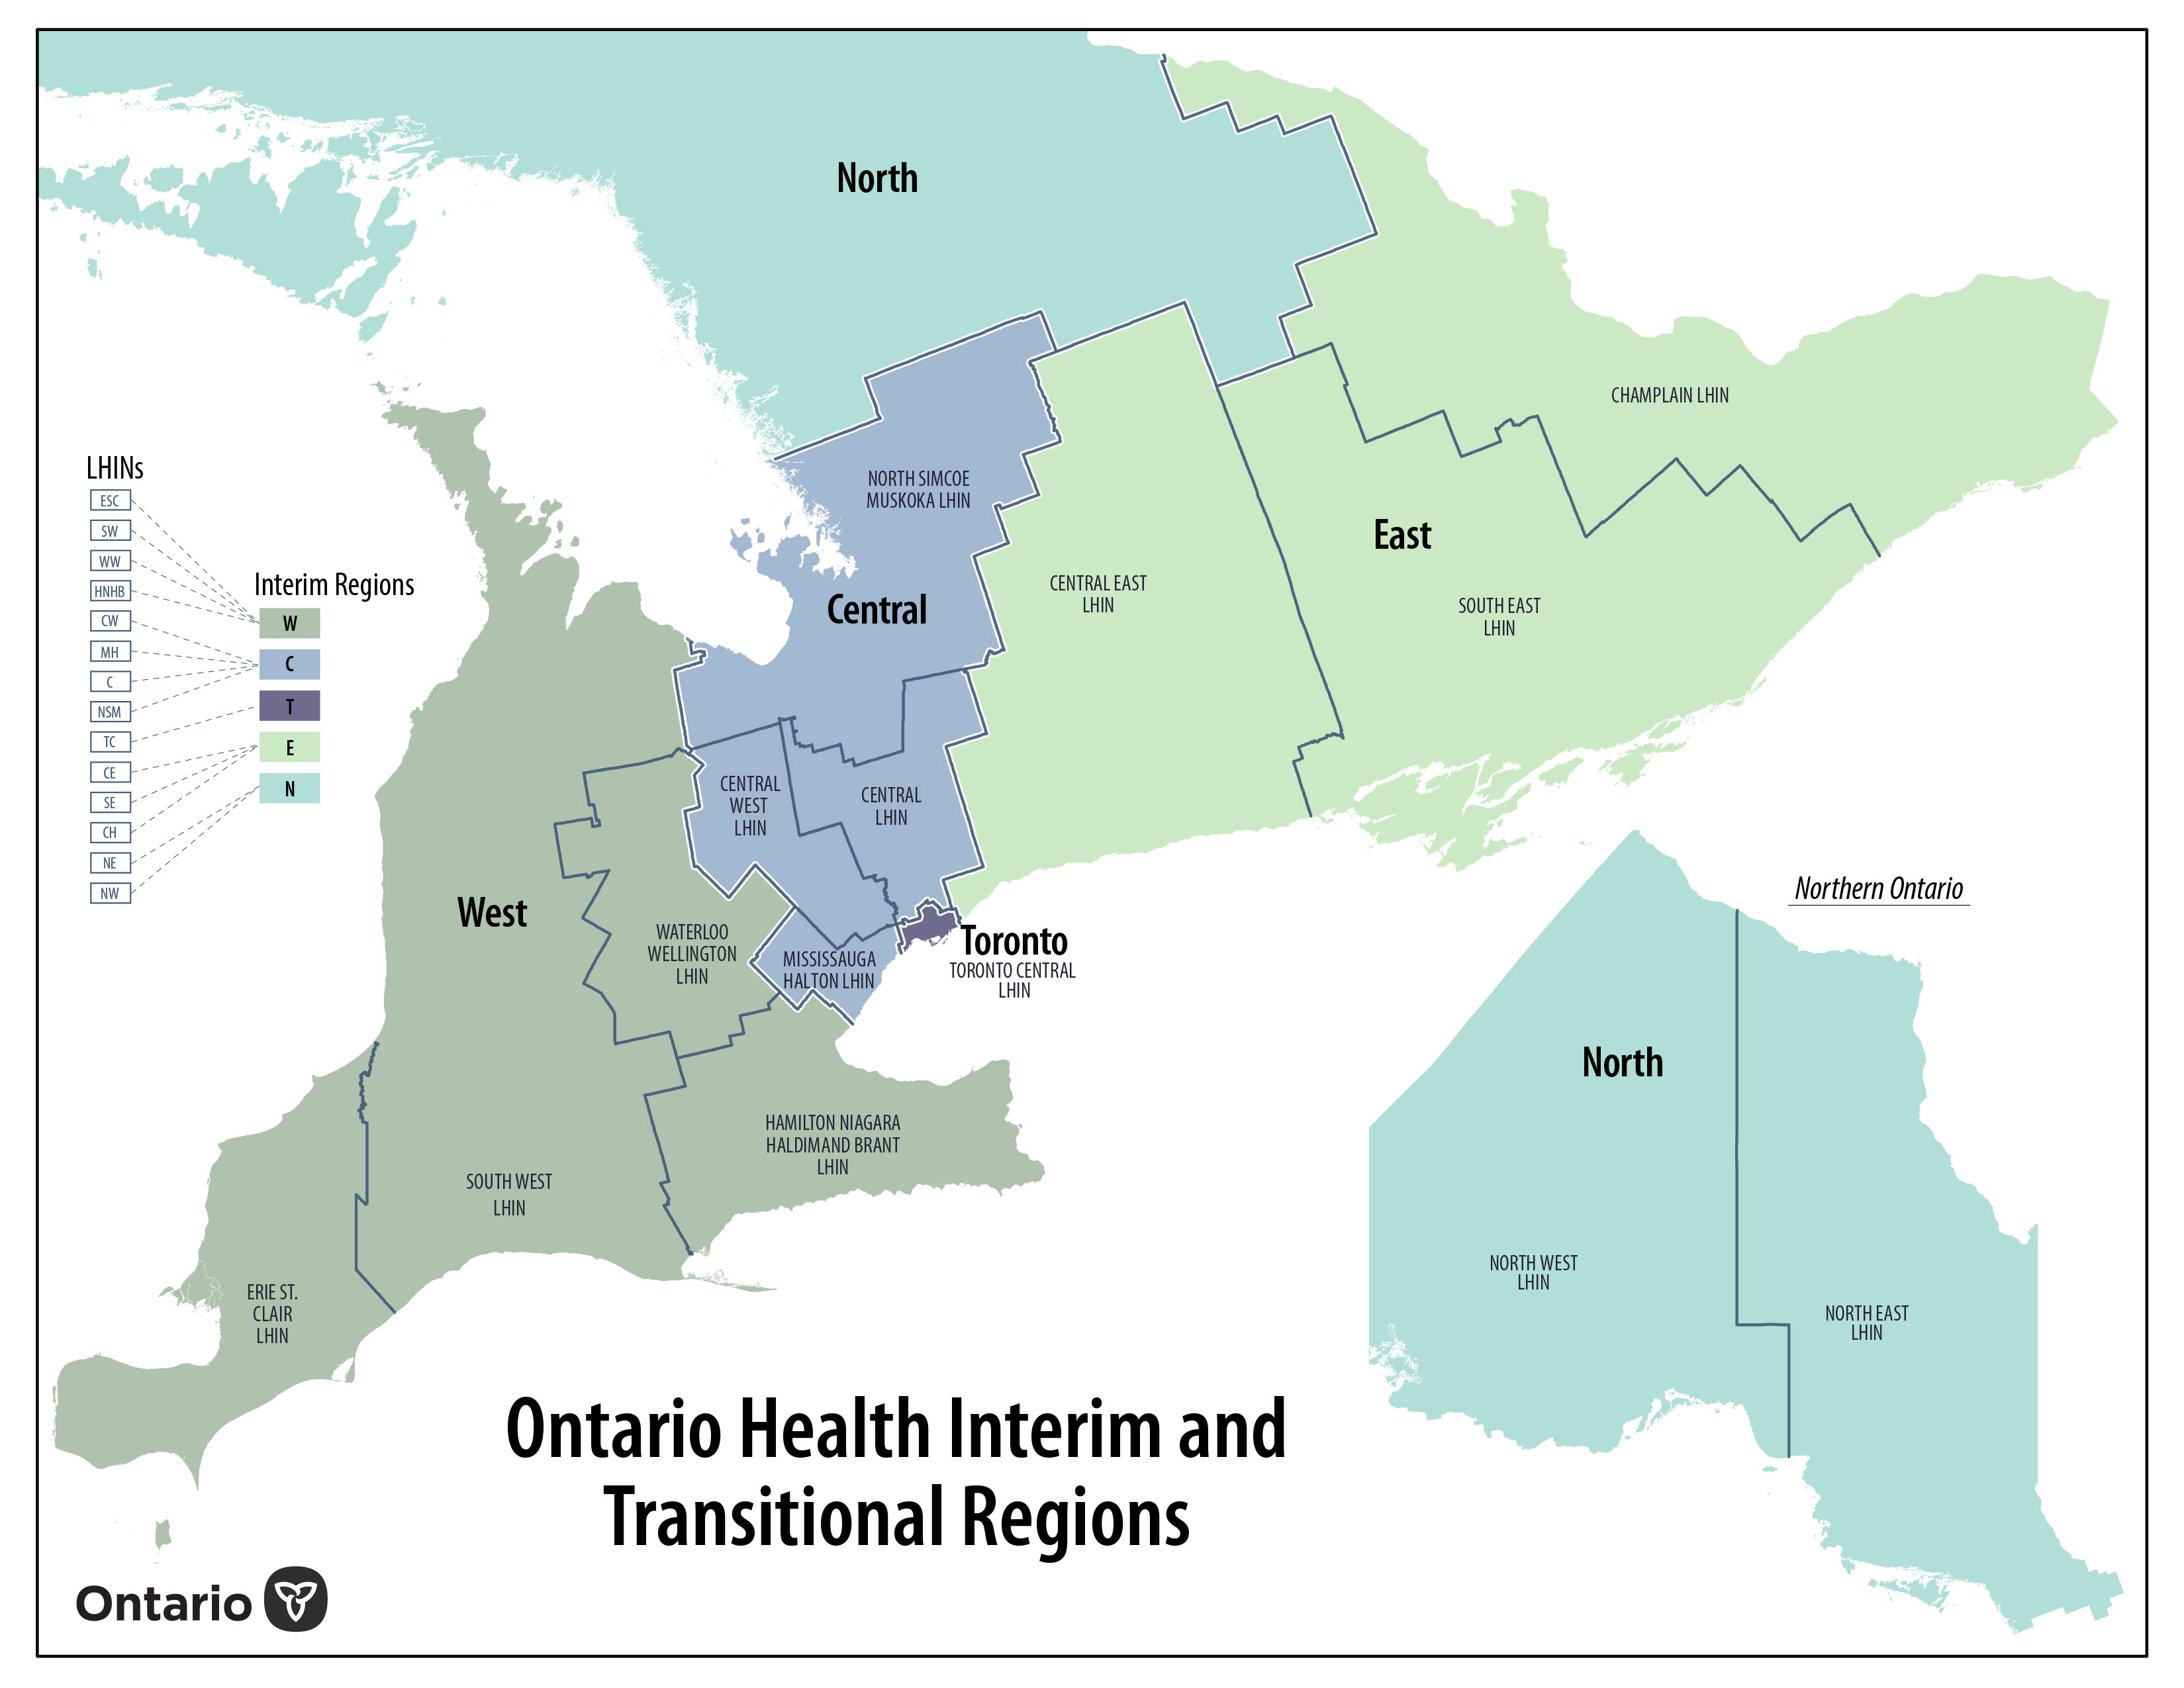 Map of Ontario Health Interim and Transitional Regions